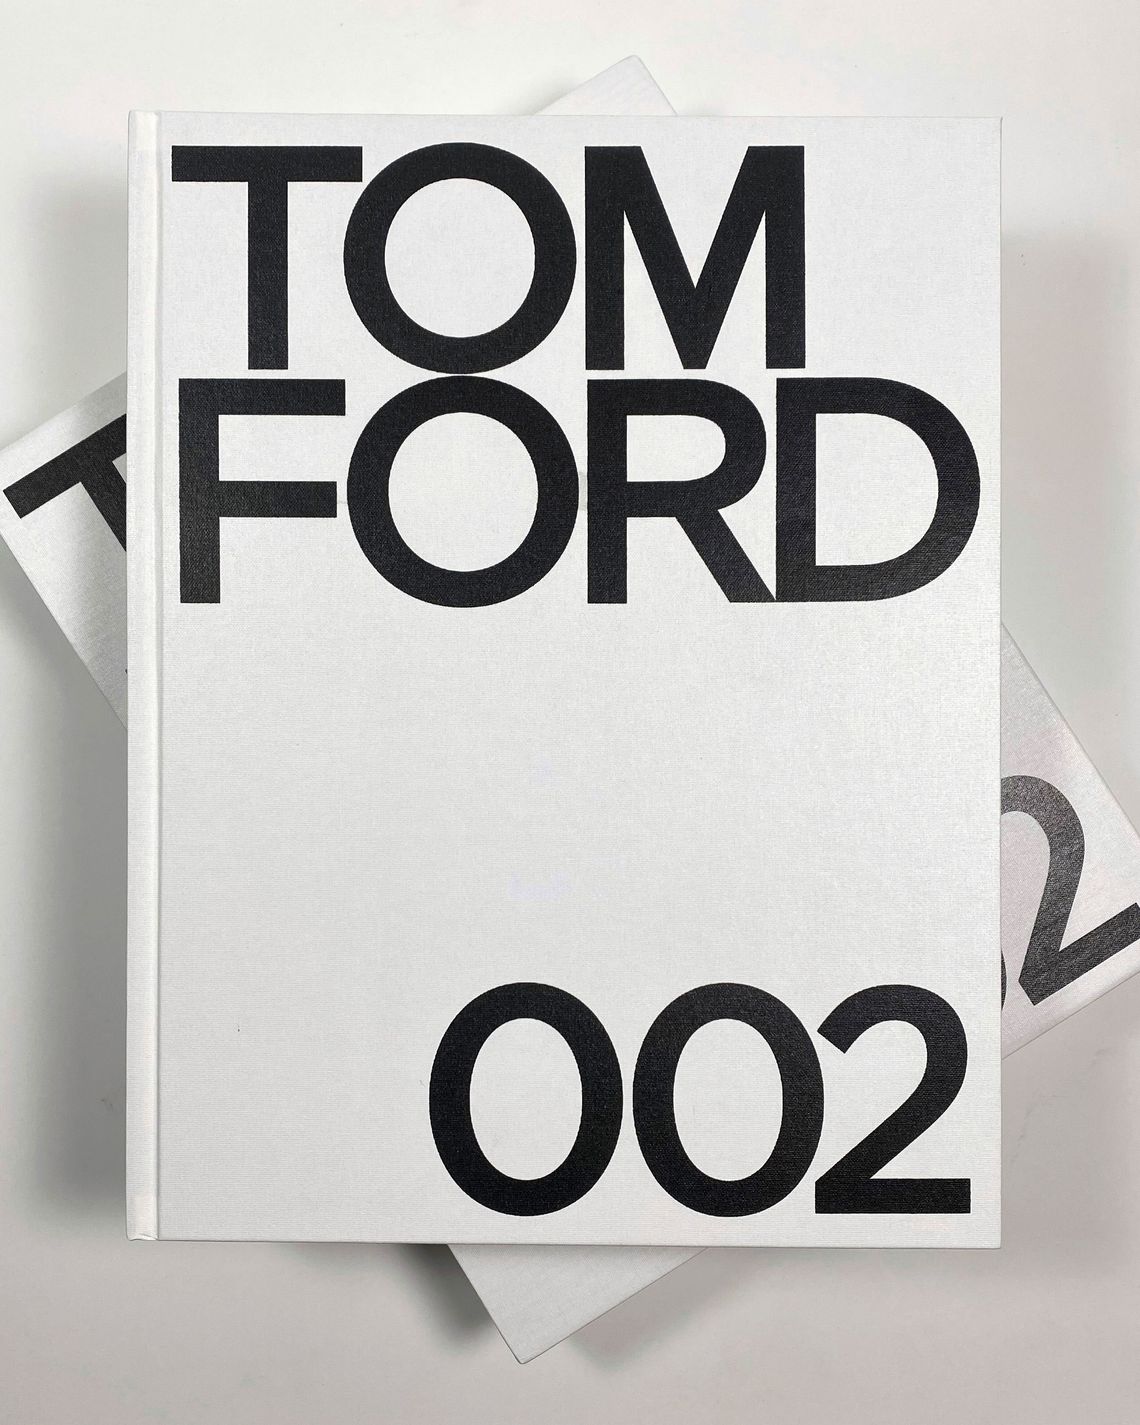 The nine lives of Tom Ford - TODAY